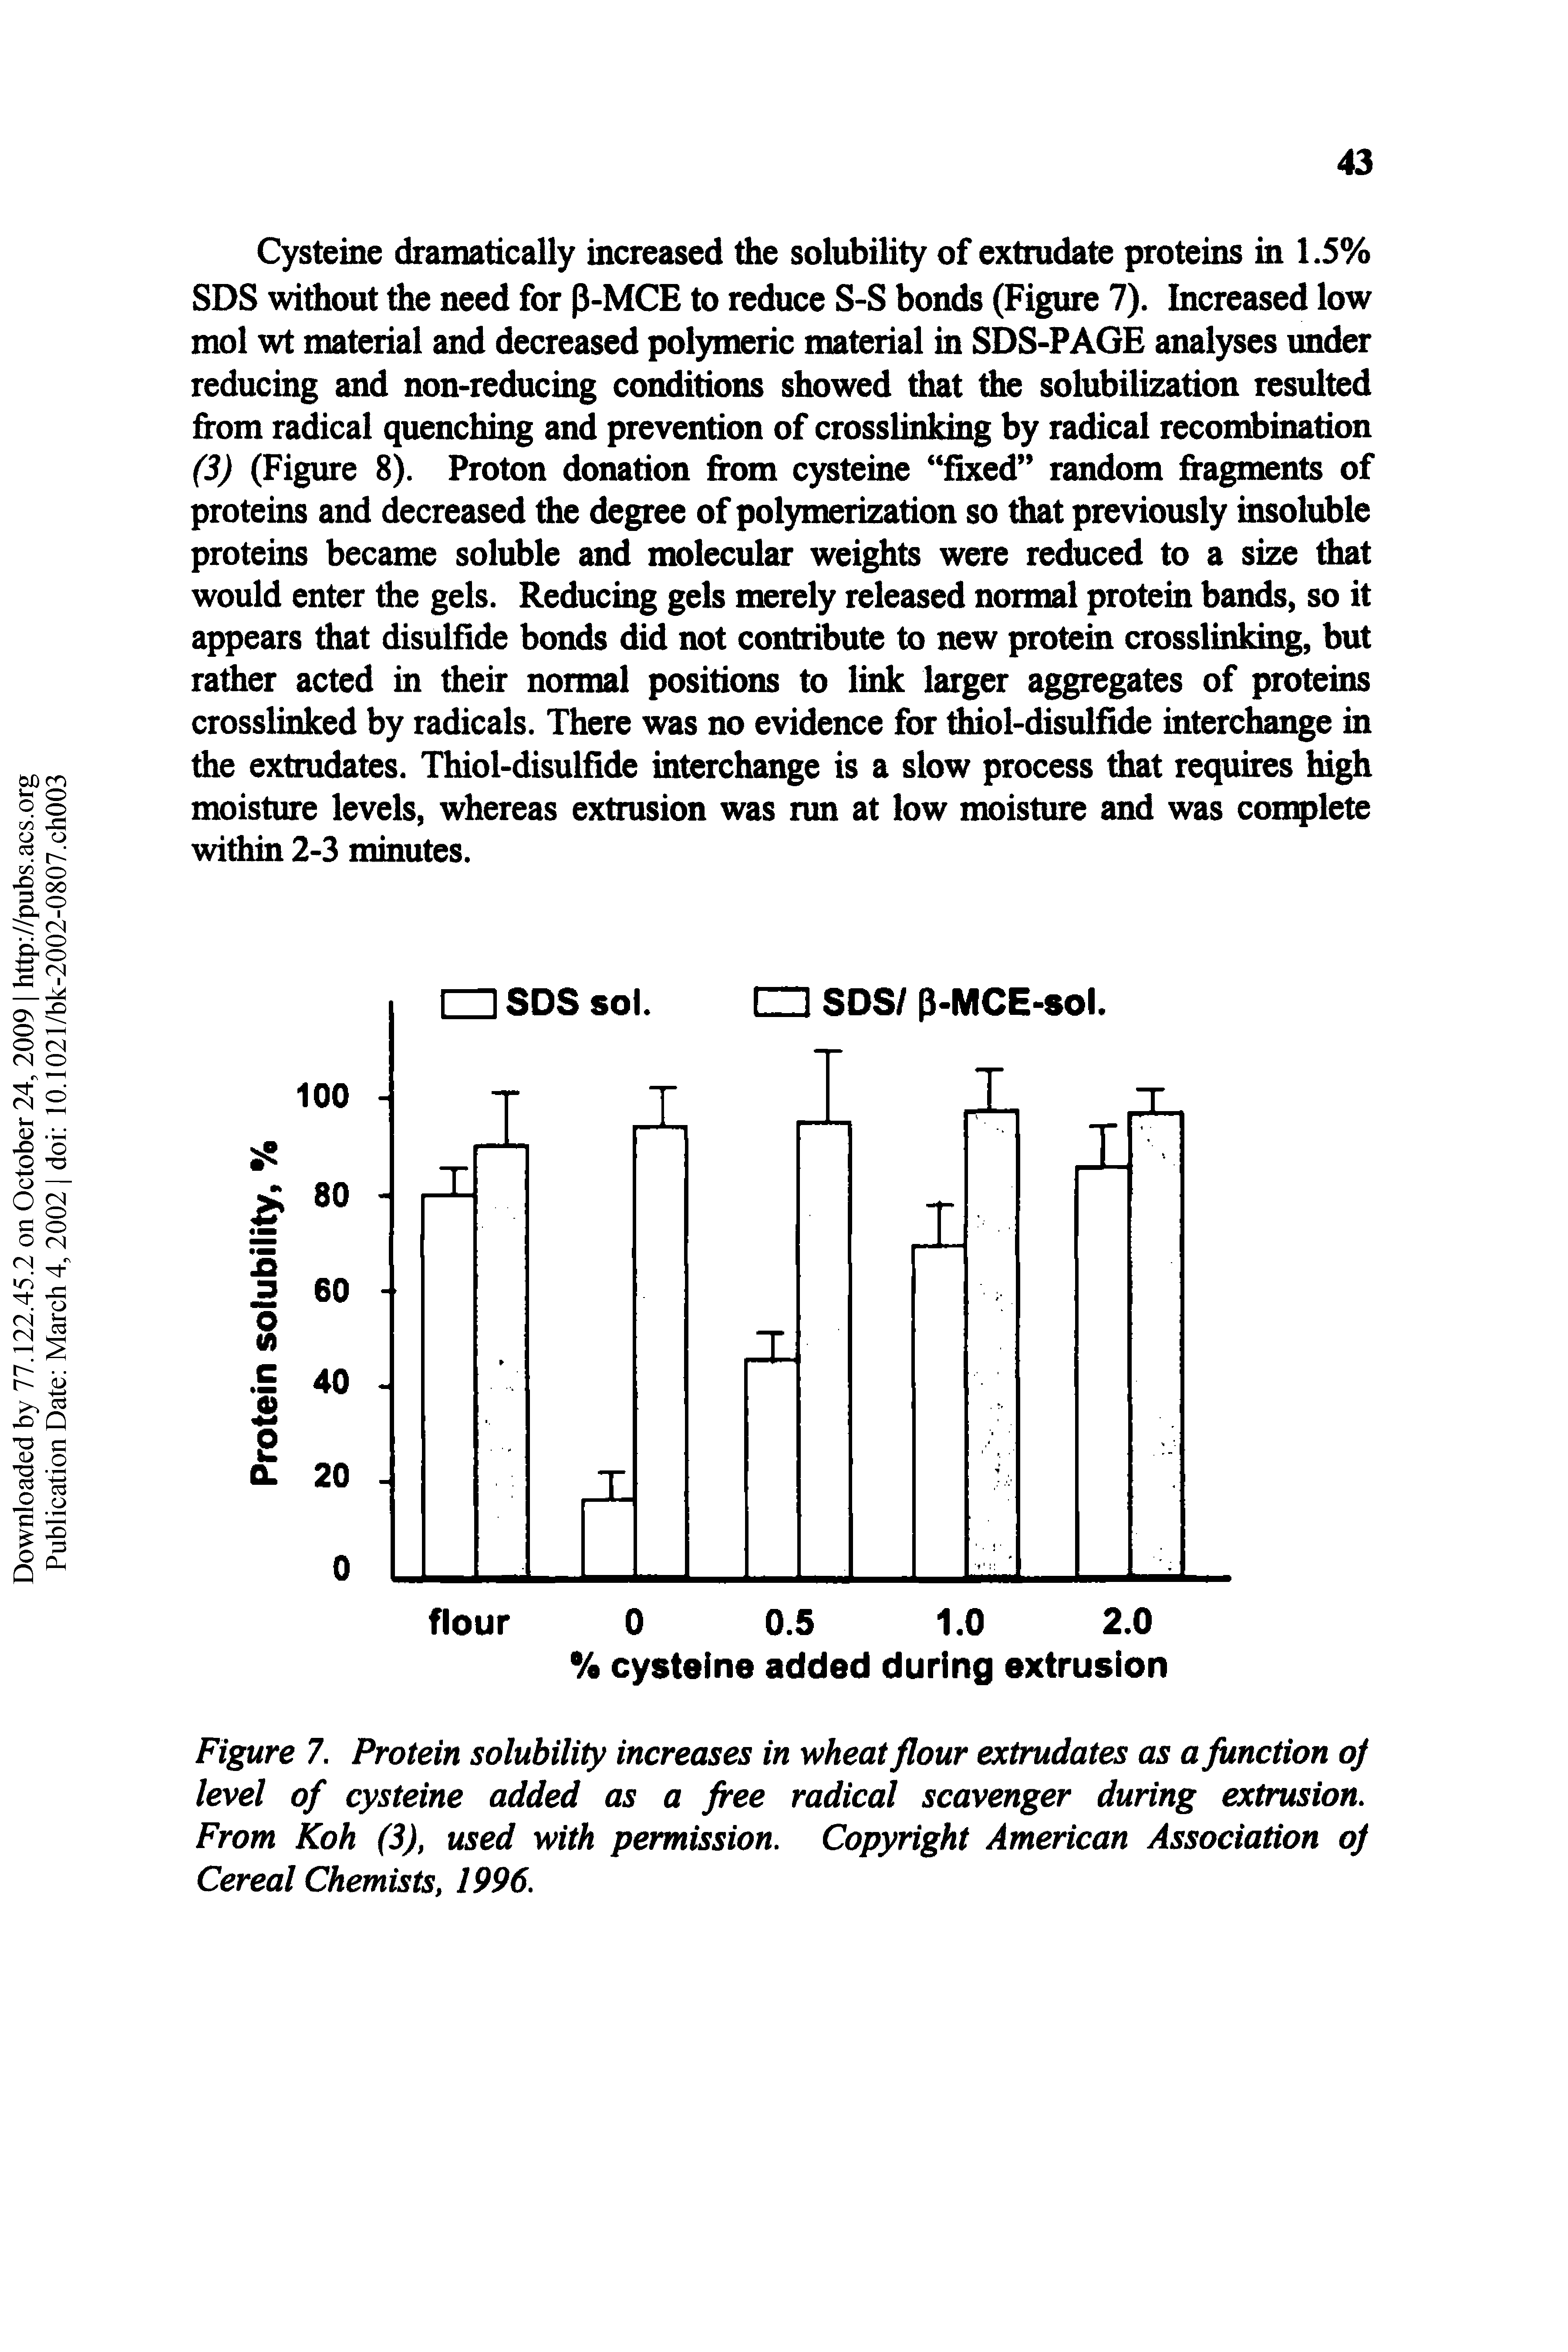 Figure 7. Protein solubility increases in wheat flour extrudates as a junction oj level of cysteine added as a free radical scavenger during extrusion. From Koh (3), used with permission. Copyright American Association oJ Cereal Chemists, 1996.